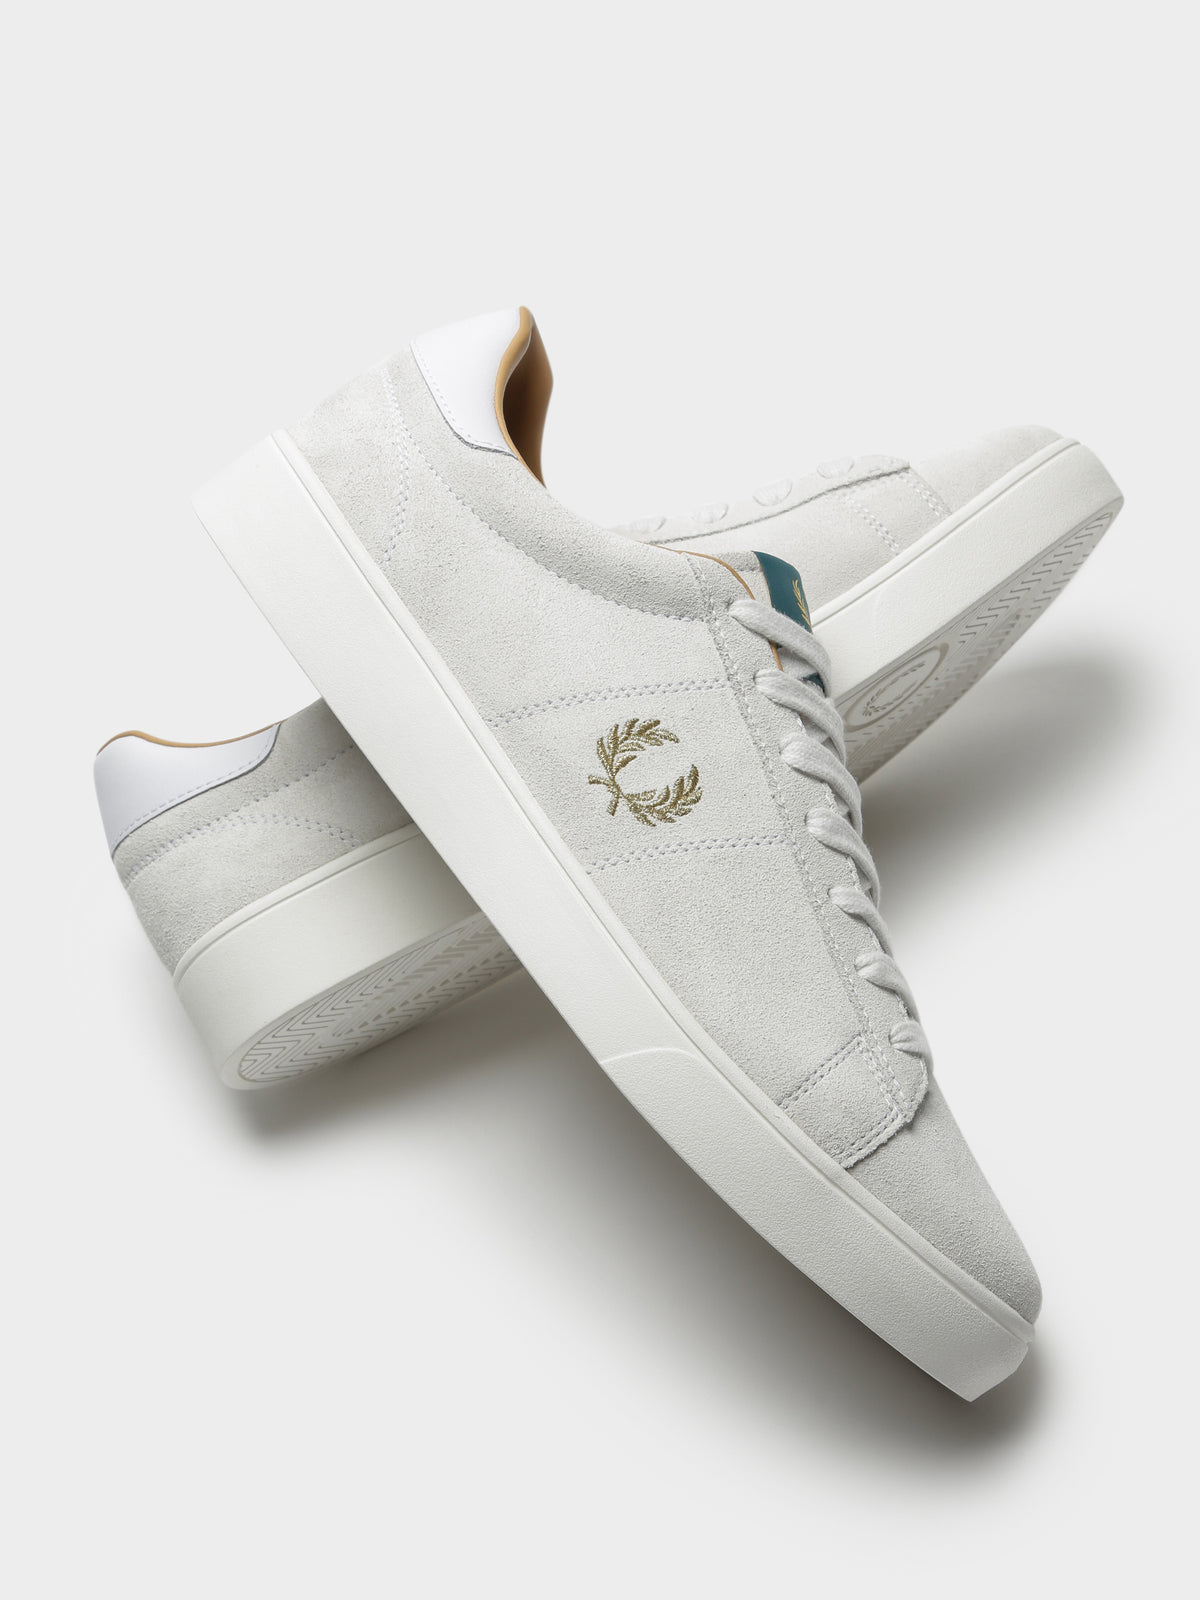 Mens Spencer Suede Sneakers in White and Gold